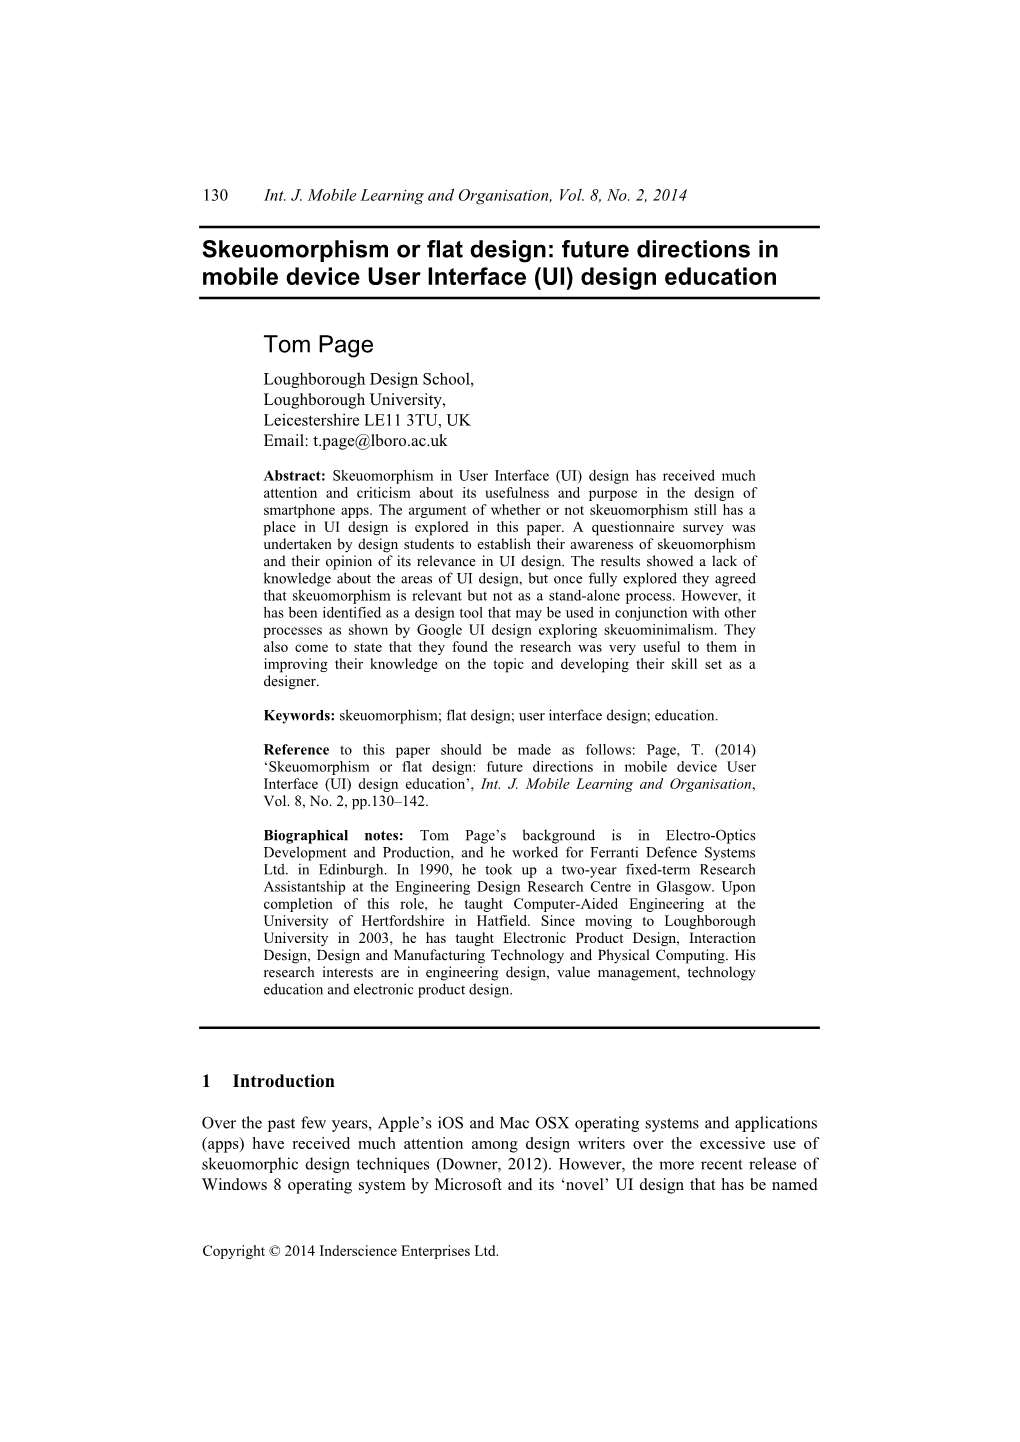 Skeuomorphism Or Flat Design: Future Directions in Mobile Device User Interface (UI) Design Education Tom Page